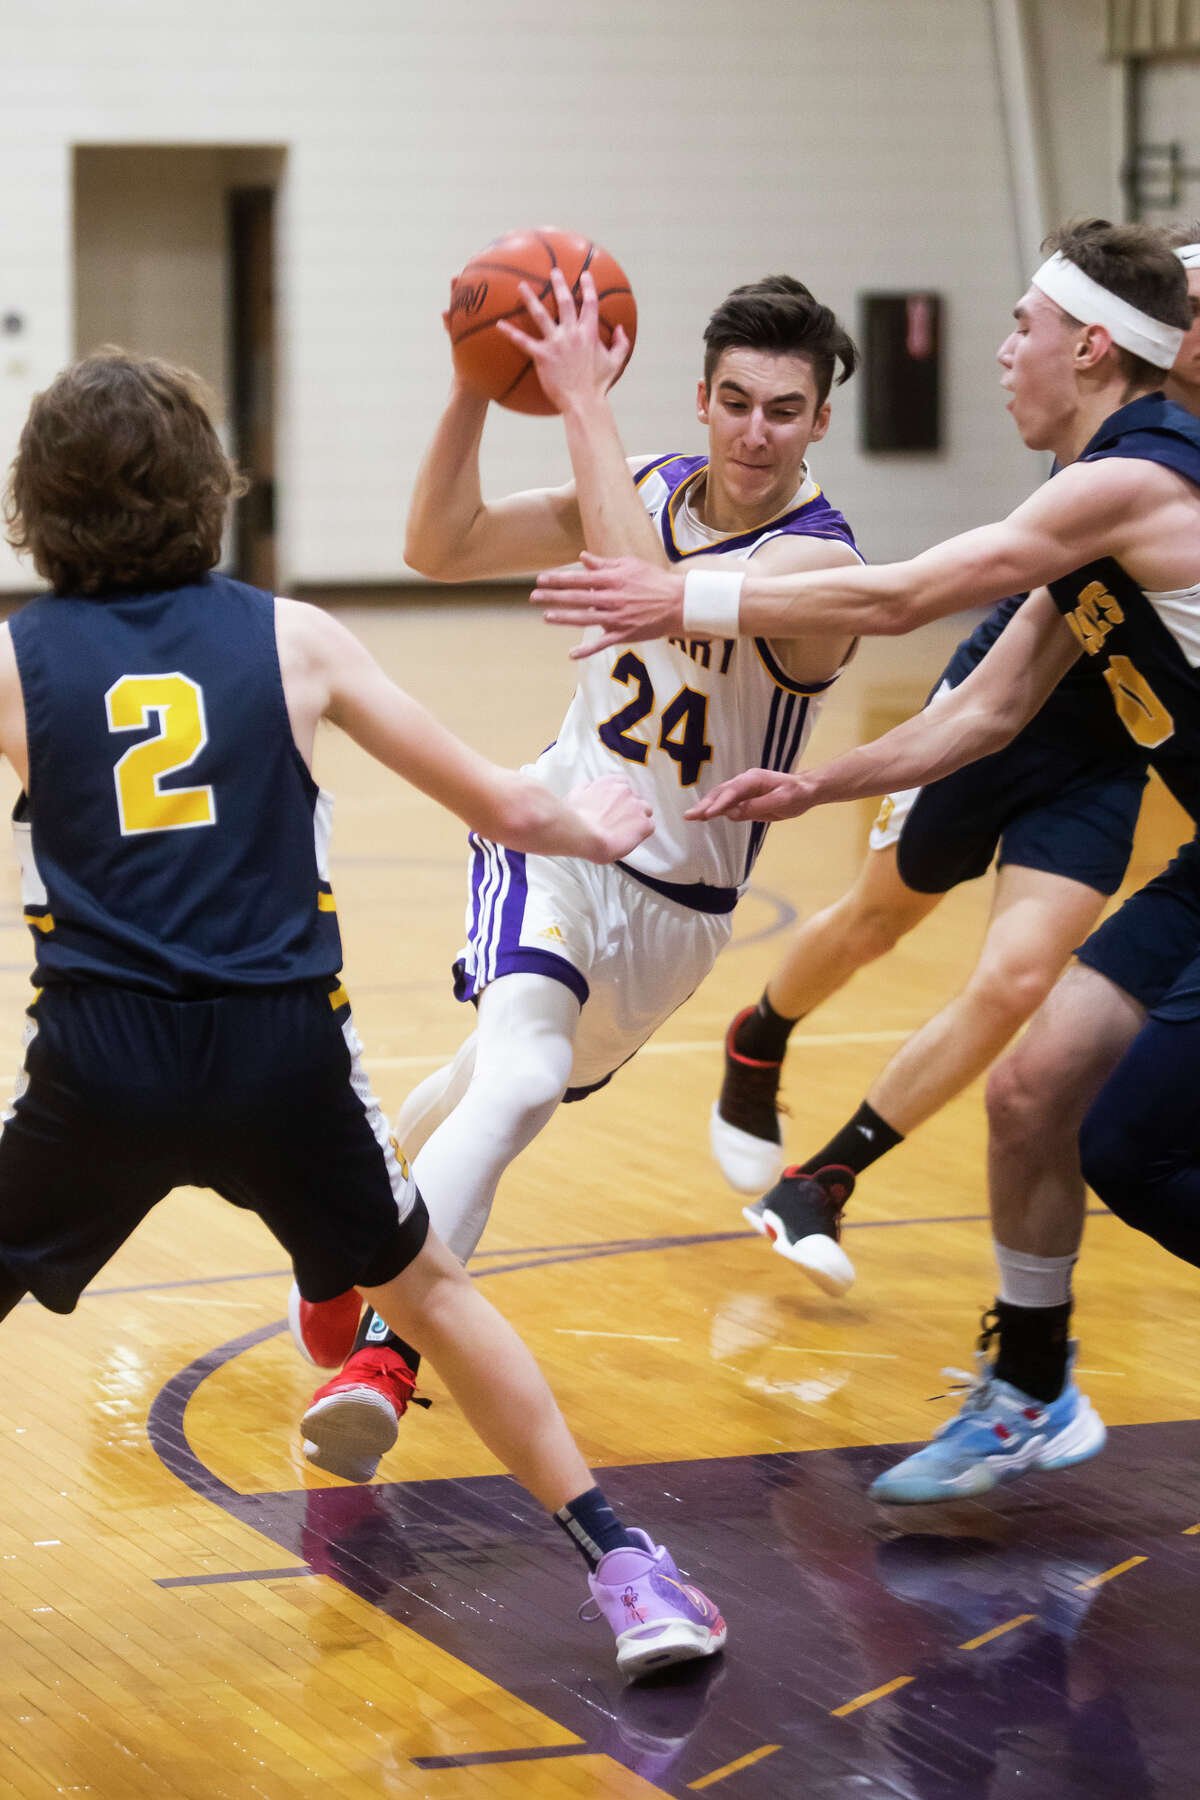 Calvary Eric Grabill drives towards the basket during a game against Breckenridge Tuesday, Feb. 1, 2022 at Calvary Baptist Academy. Grabill scored 34 points in a win over Lakeview on Thursday.